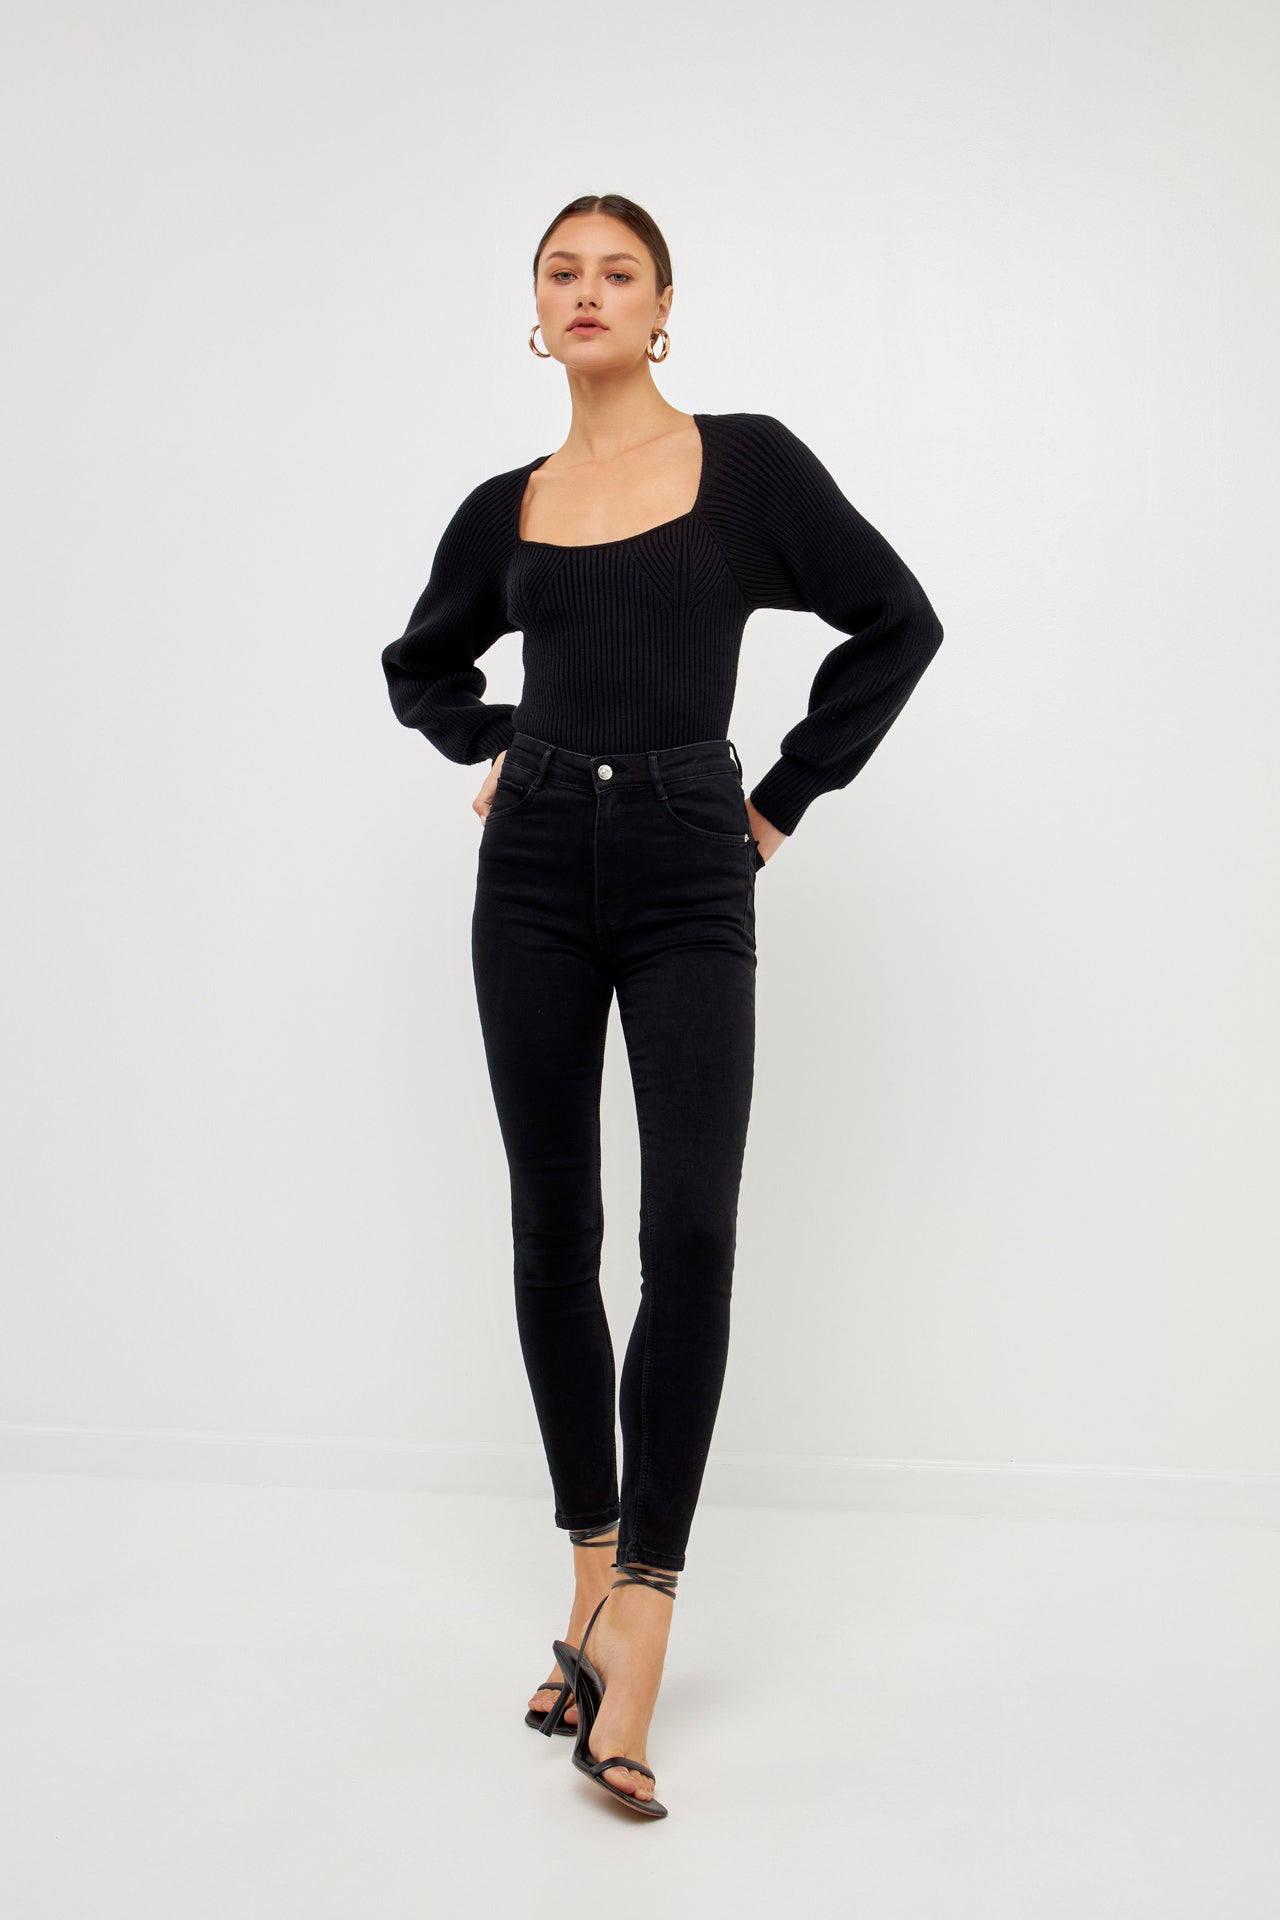 Knitted top in black featuring square neckline, ribbed detailing, balloon sleeves.  Front full view.